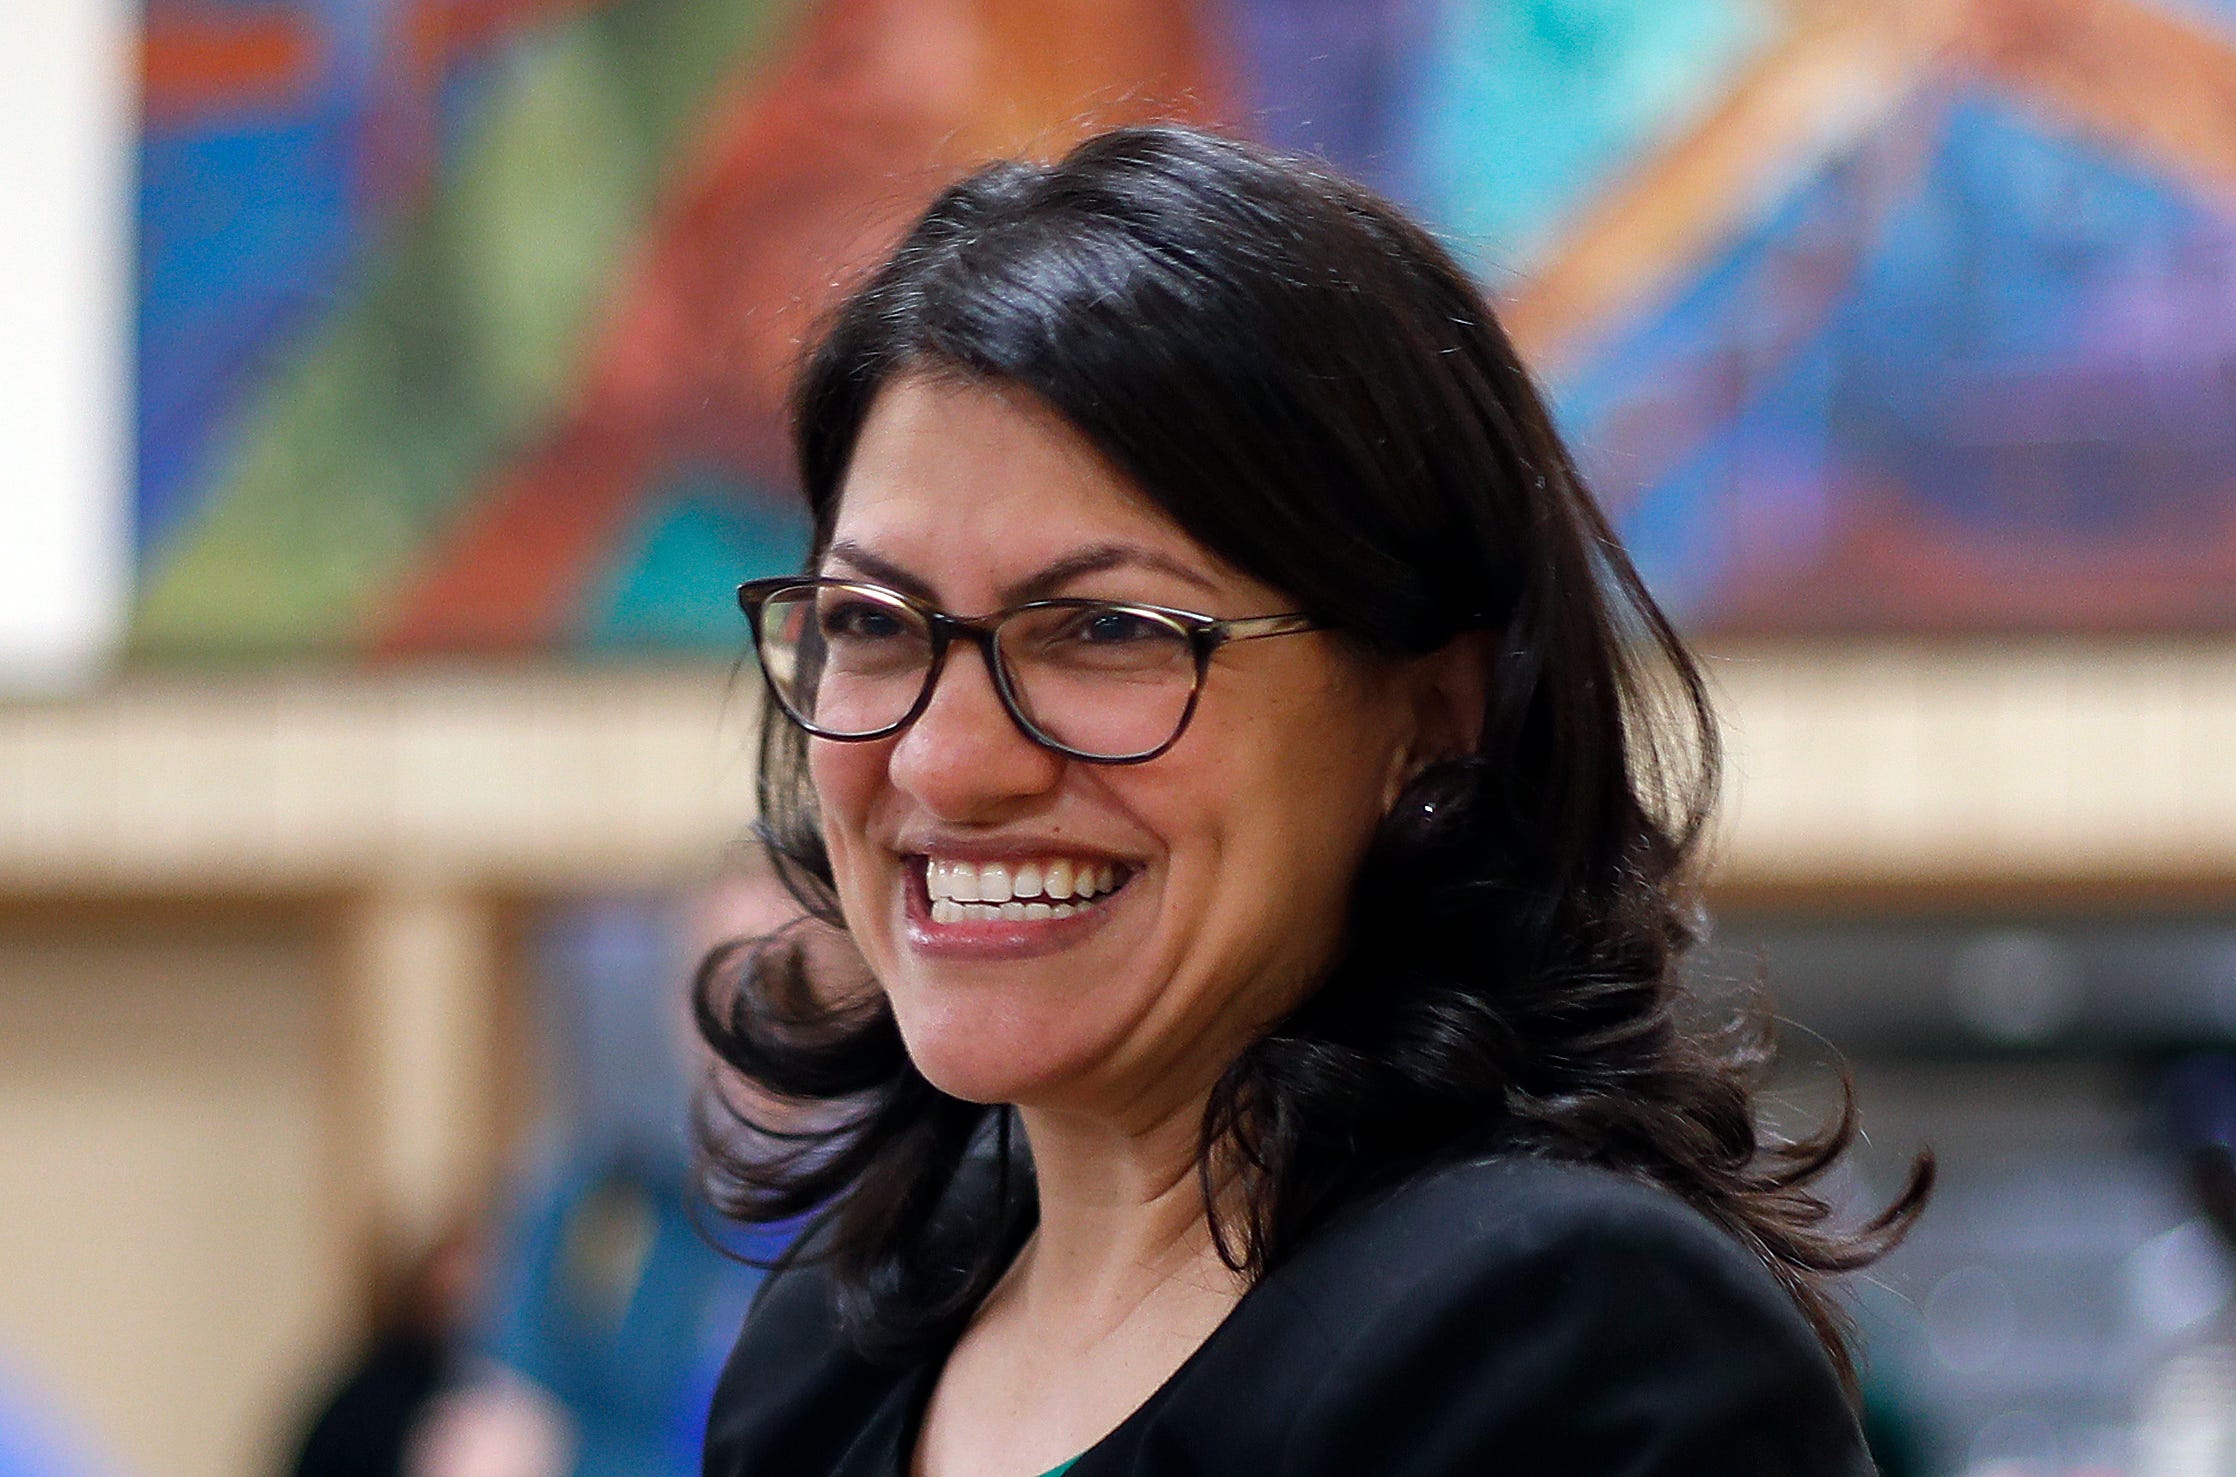 Newly sworn-in Rep. Rashida Tlaib of Detroit told a cheering crowd that “we’re going to ... impeach the (expletive),” referring to President Donald Trump.